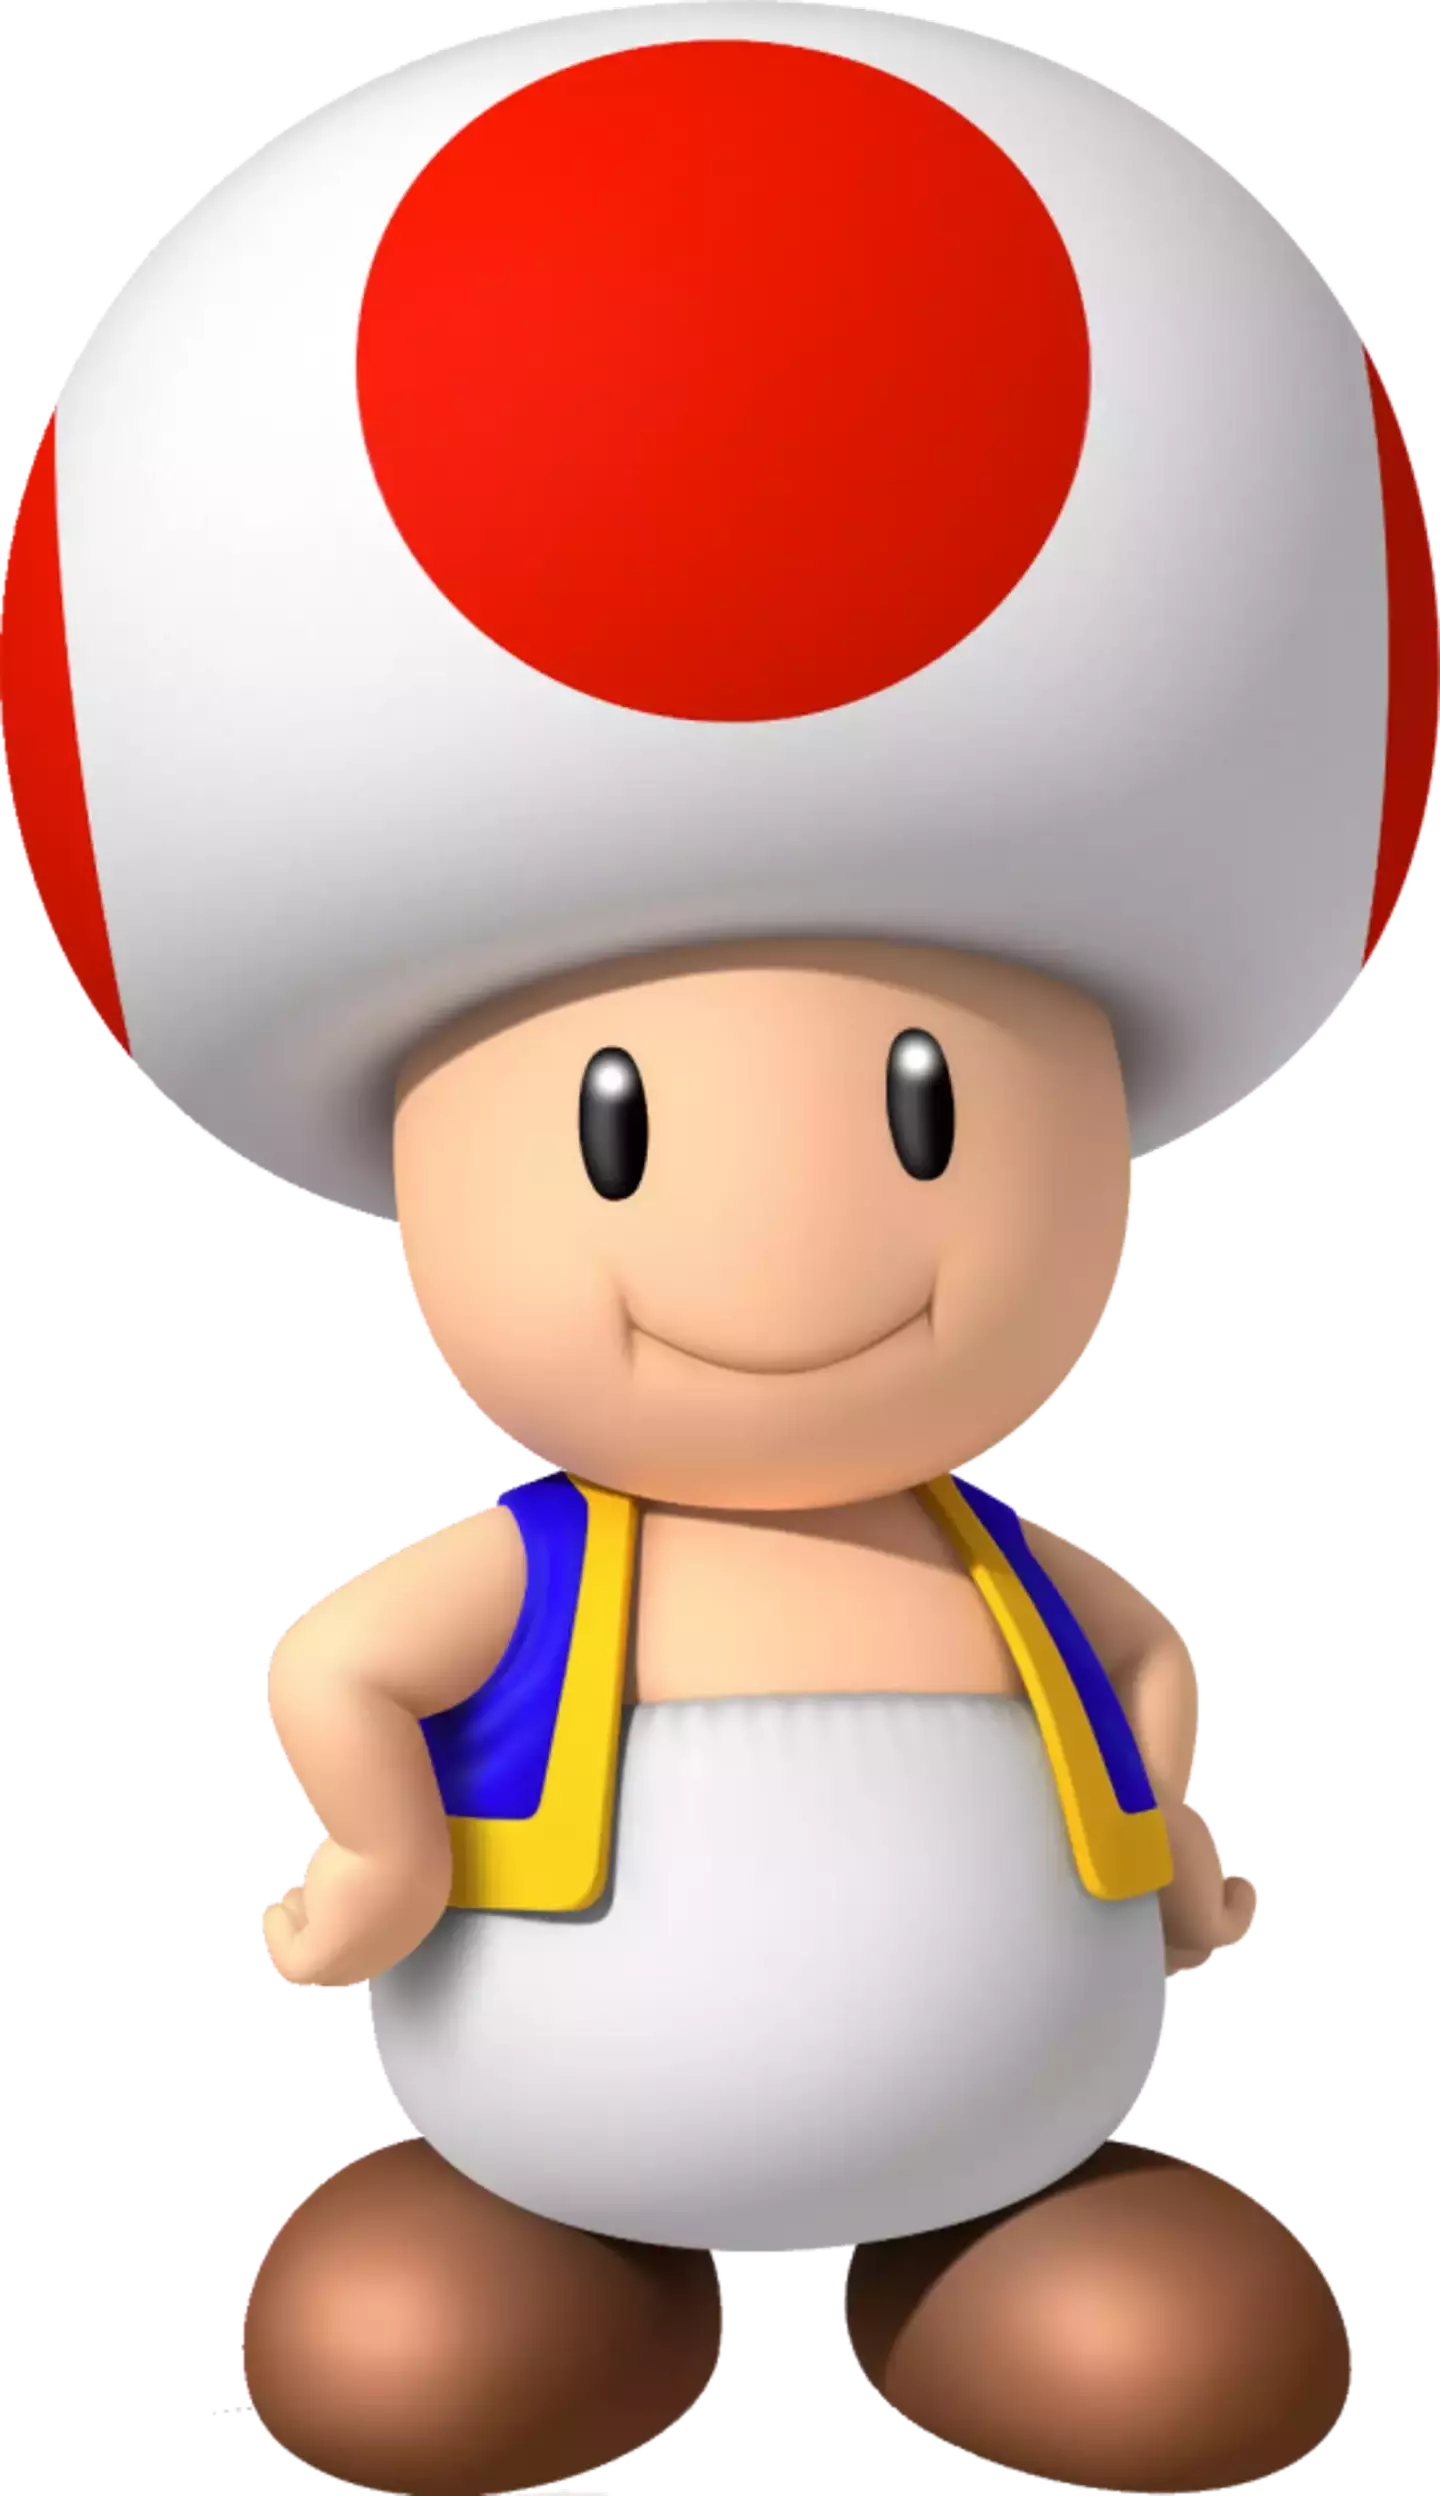 Toad from Mario - see the resemblance?